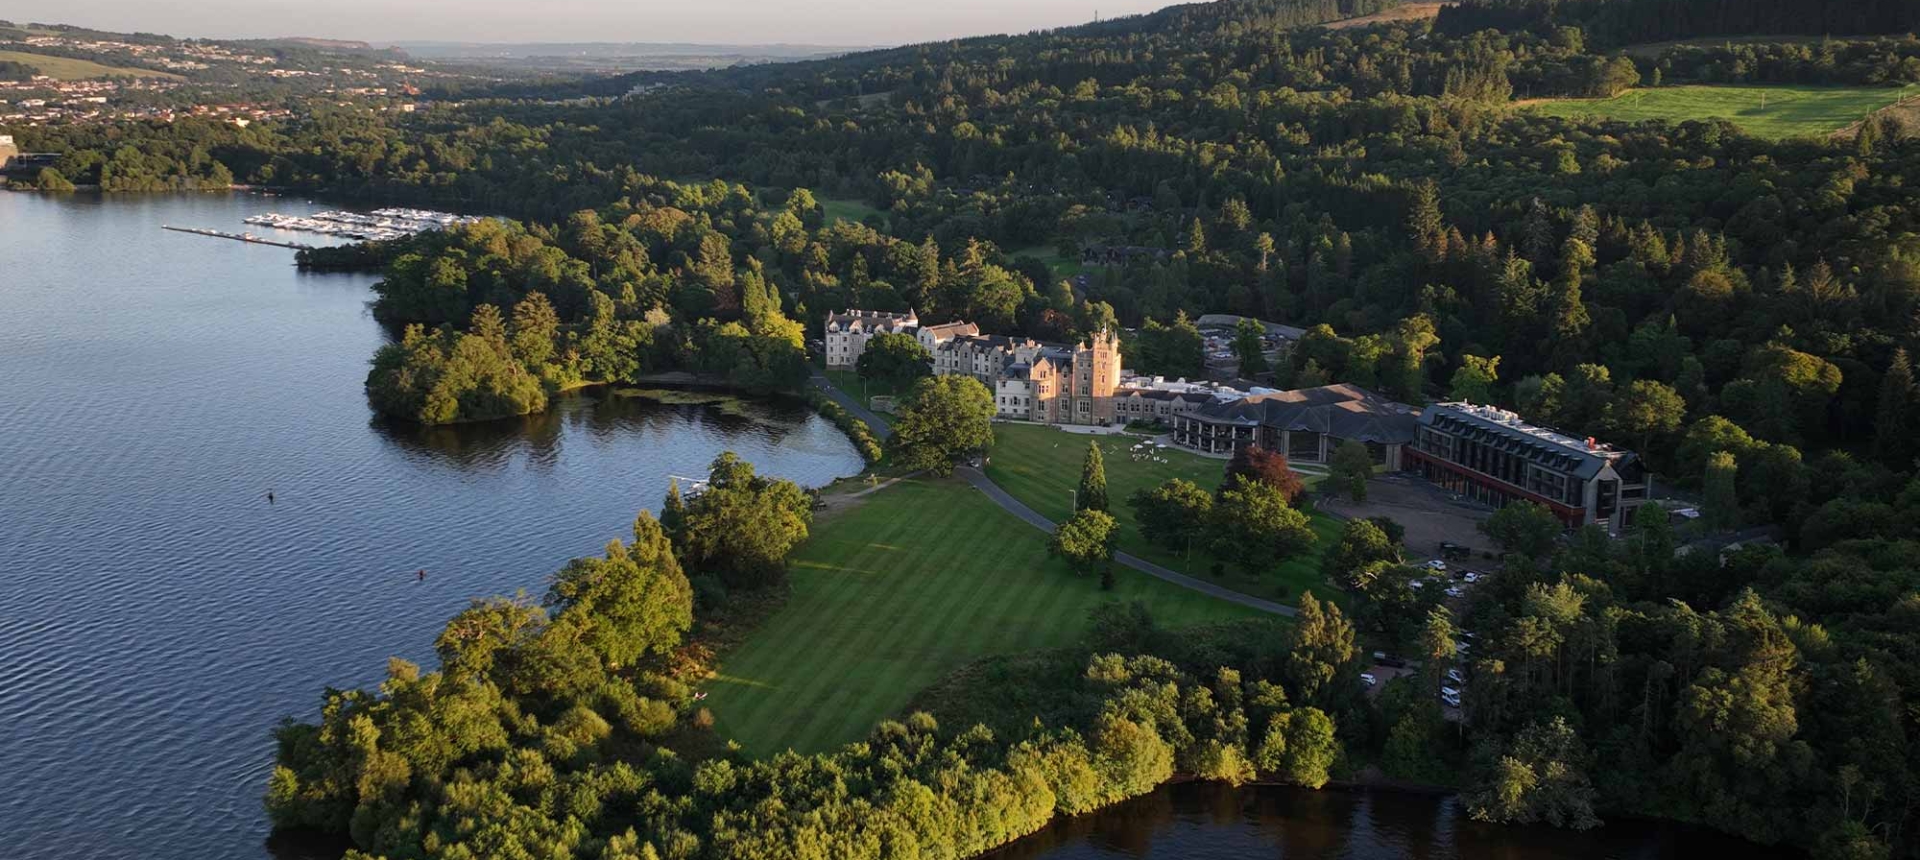 a birds eye view of cameron house with lots of trees and hills behind it